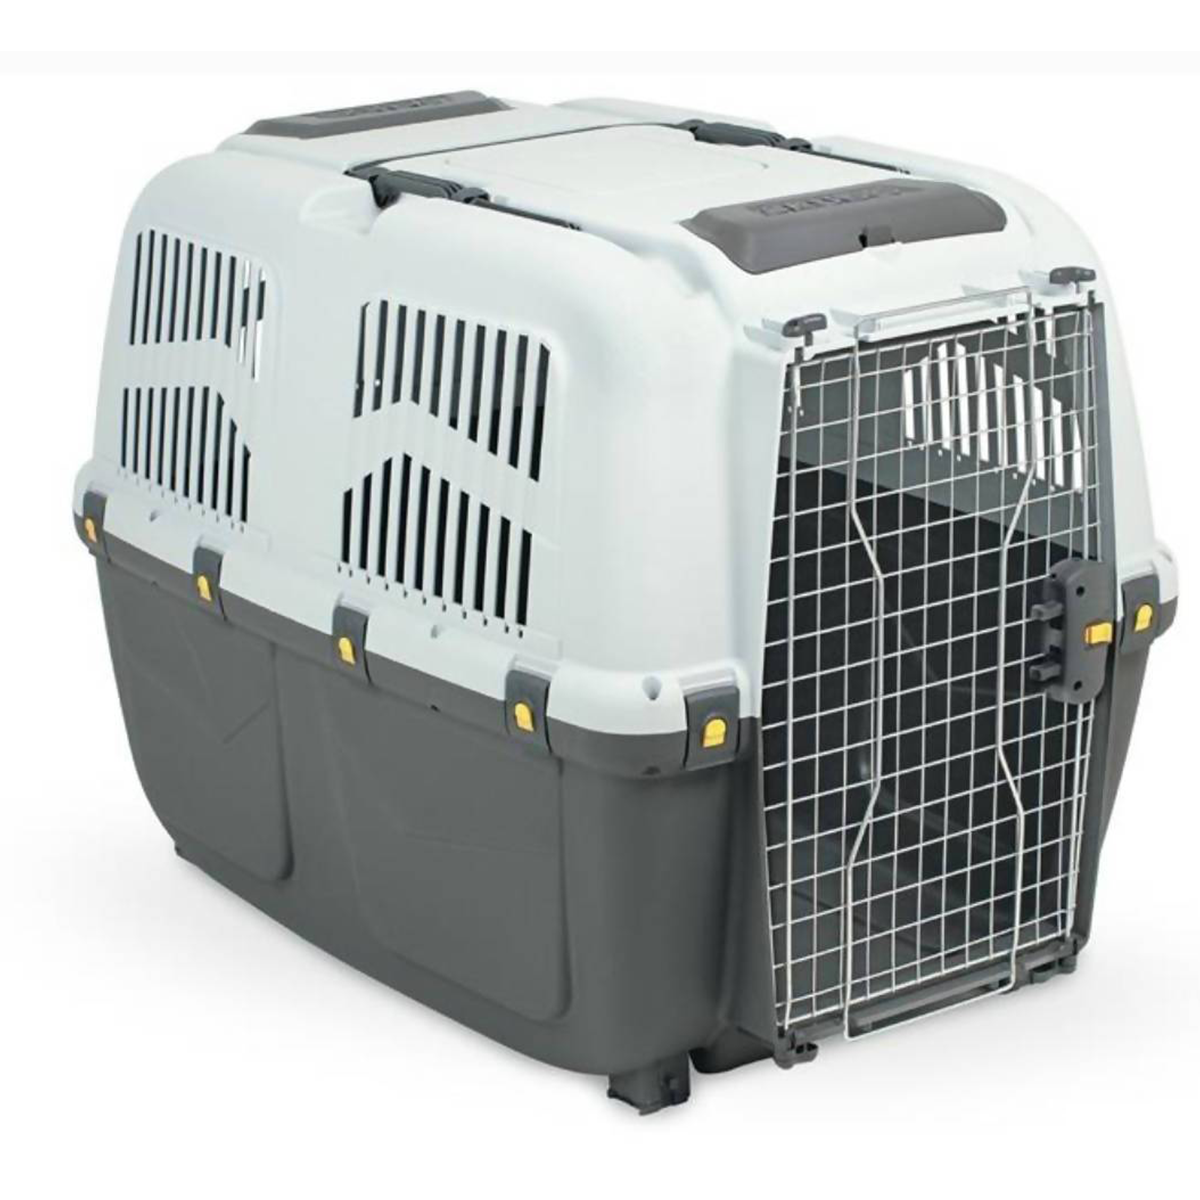 Skudo pet carriers for large dogs - SKUDO (XXL)